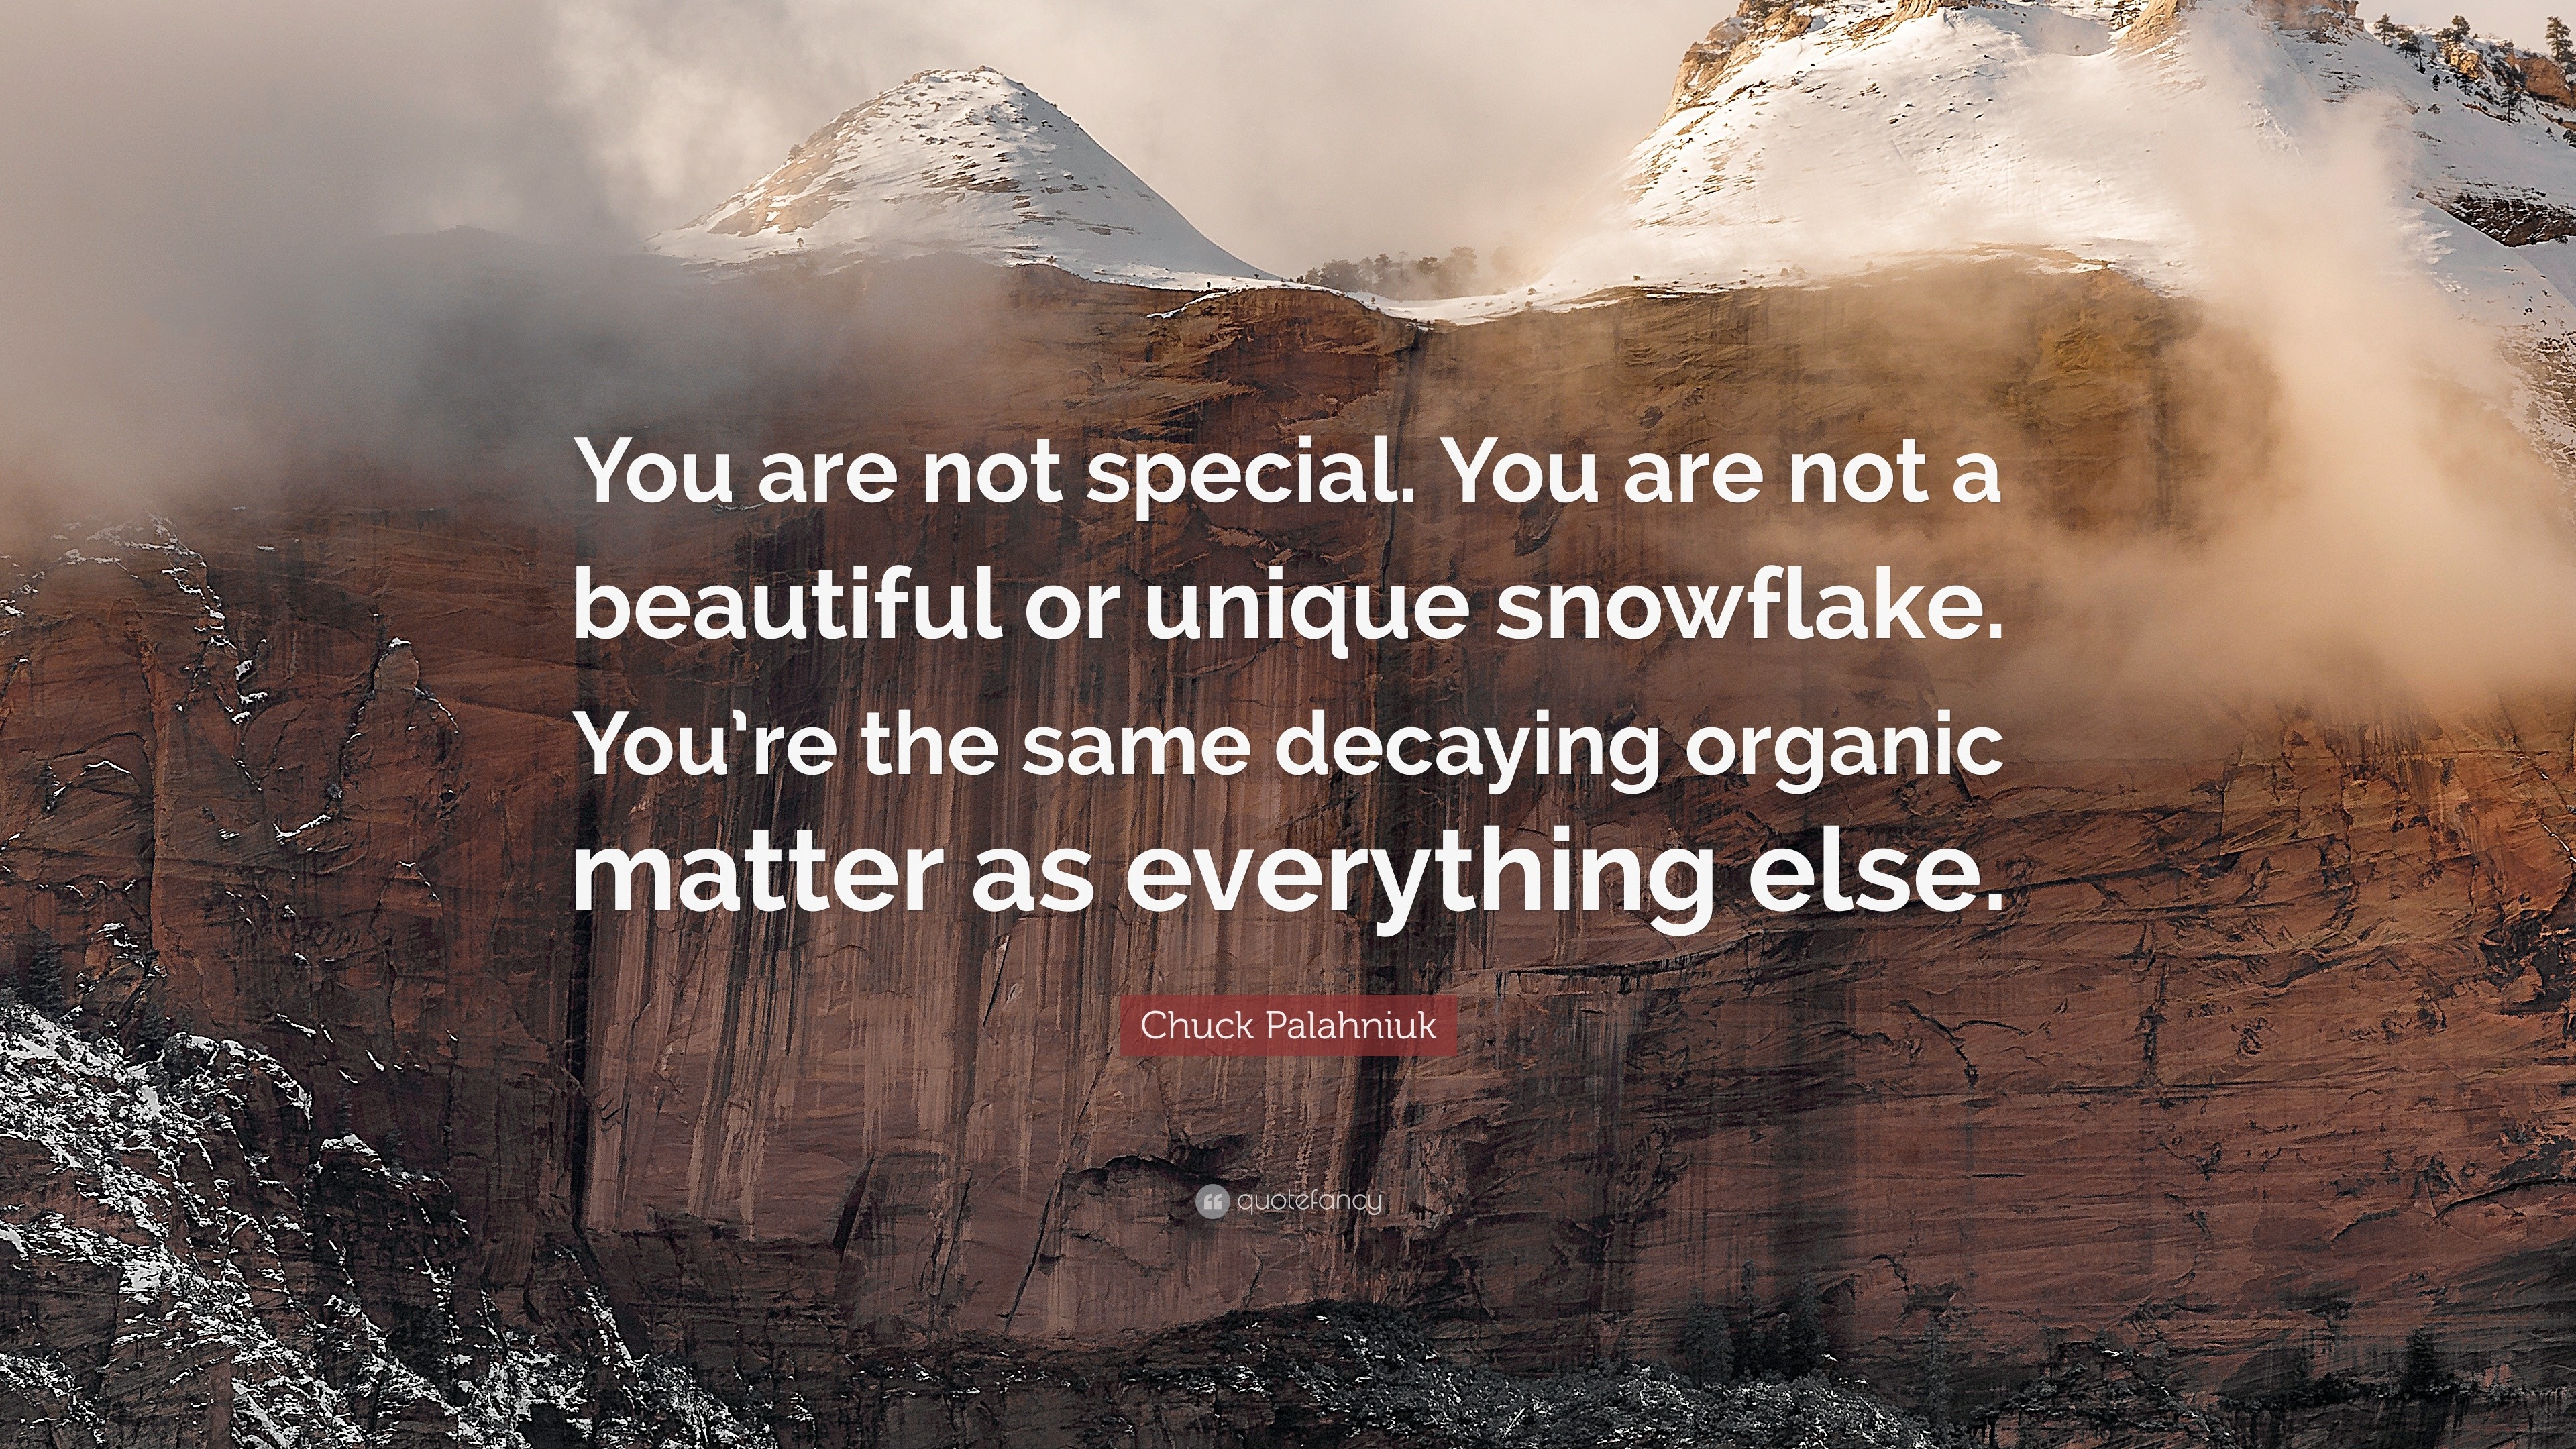 Chuck Palahniuk Quote You Are Not Special You Are Not A Beautiful Or Unique Snowflake You Re The Same Decaying Organic Matter As Everything